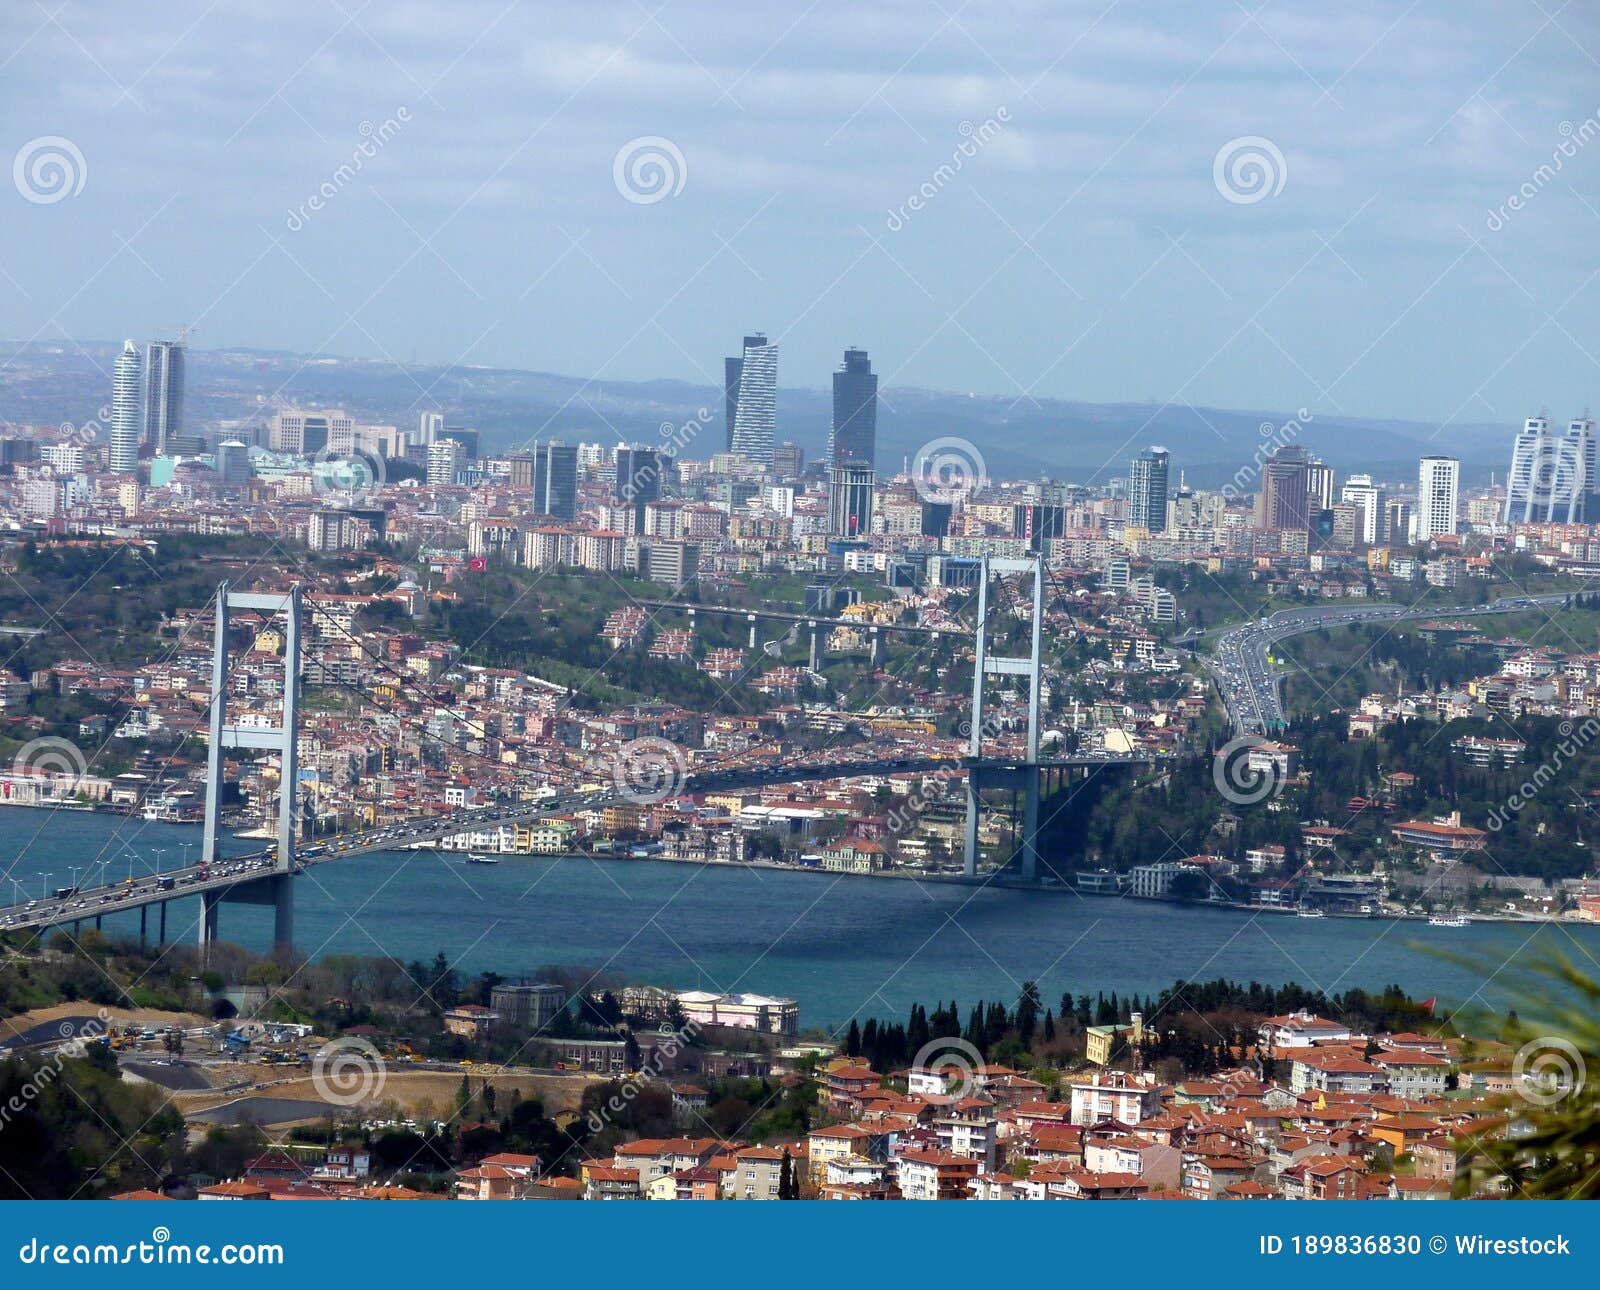 Buildings In Istanbul Turkey From The River Border Europe Asia Stock